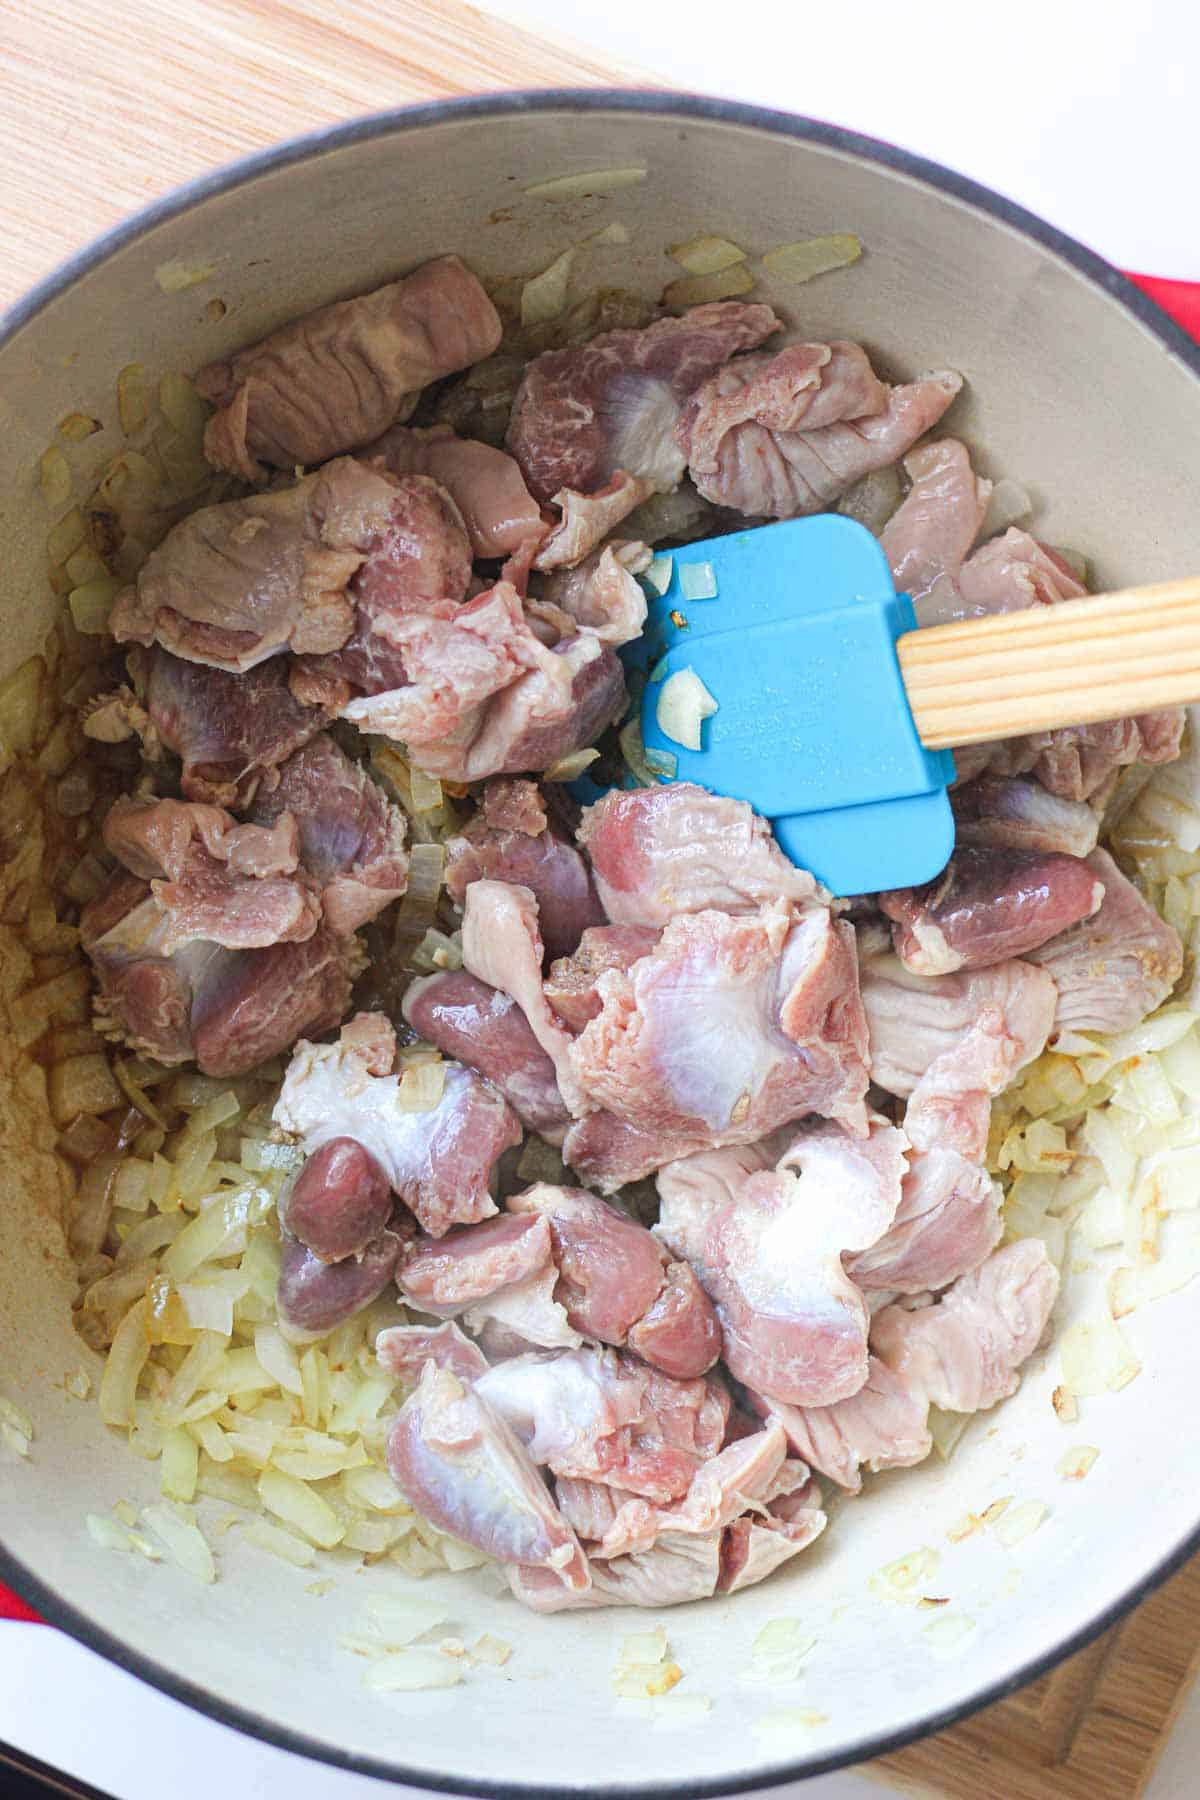 Sauteed chicken gizzards and hearts recipe - The Top Meal